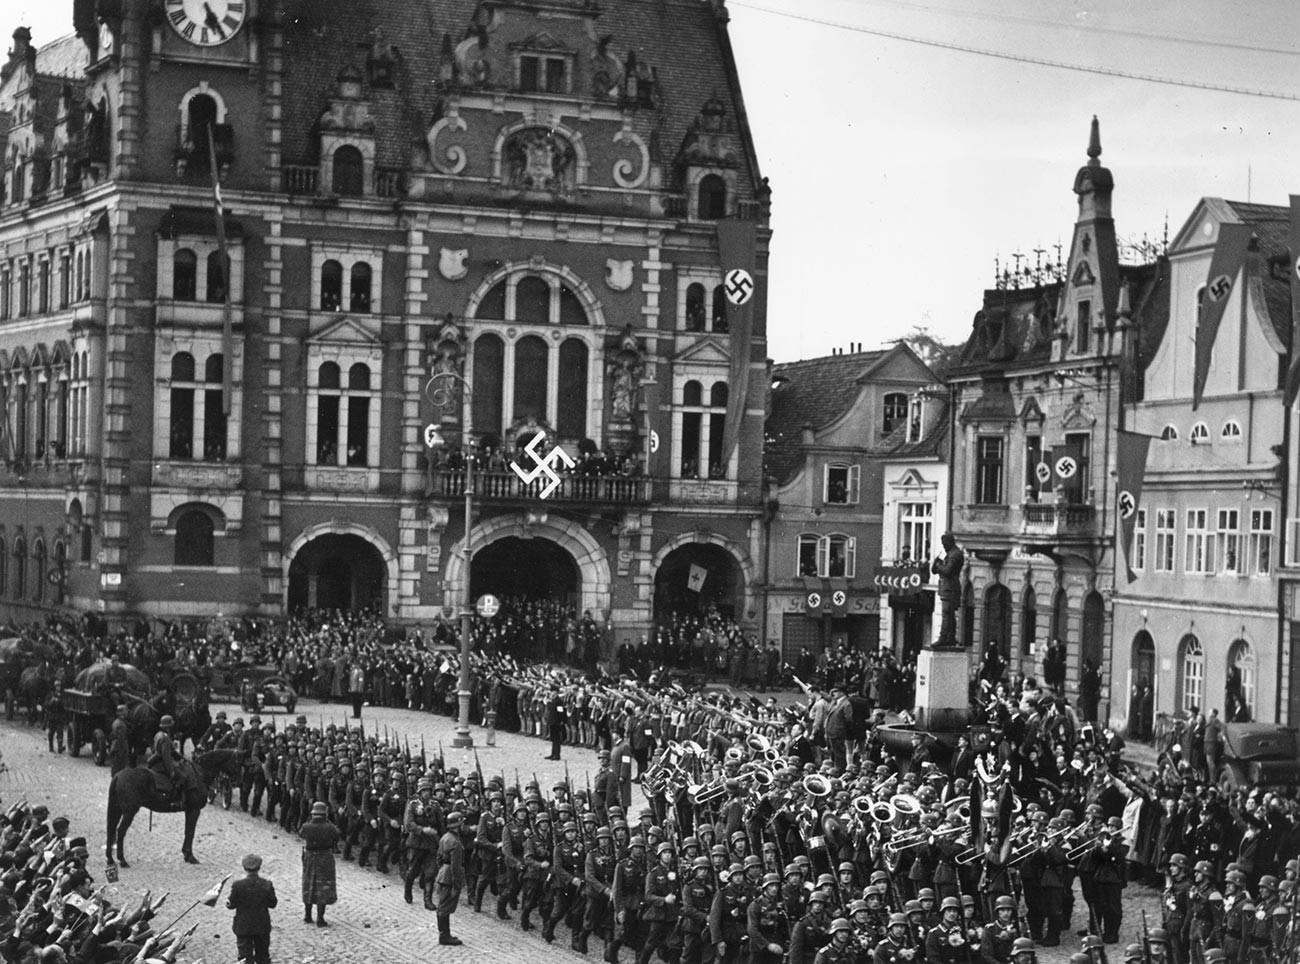 Troops of the German army march into Czechoslovak territory and parade in the town square at Rumburk, which has been decorated with swastika banners.